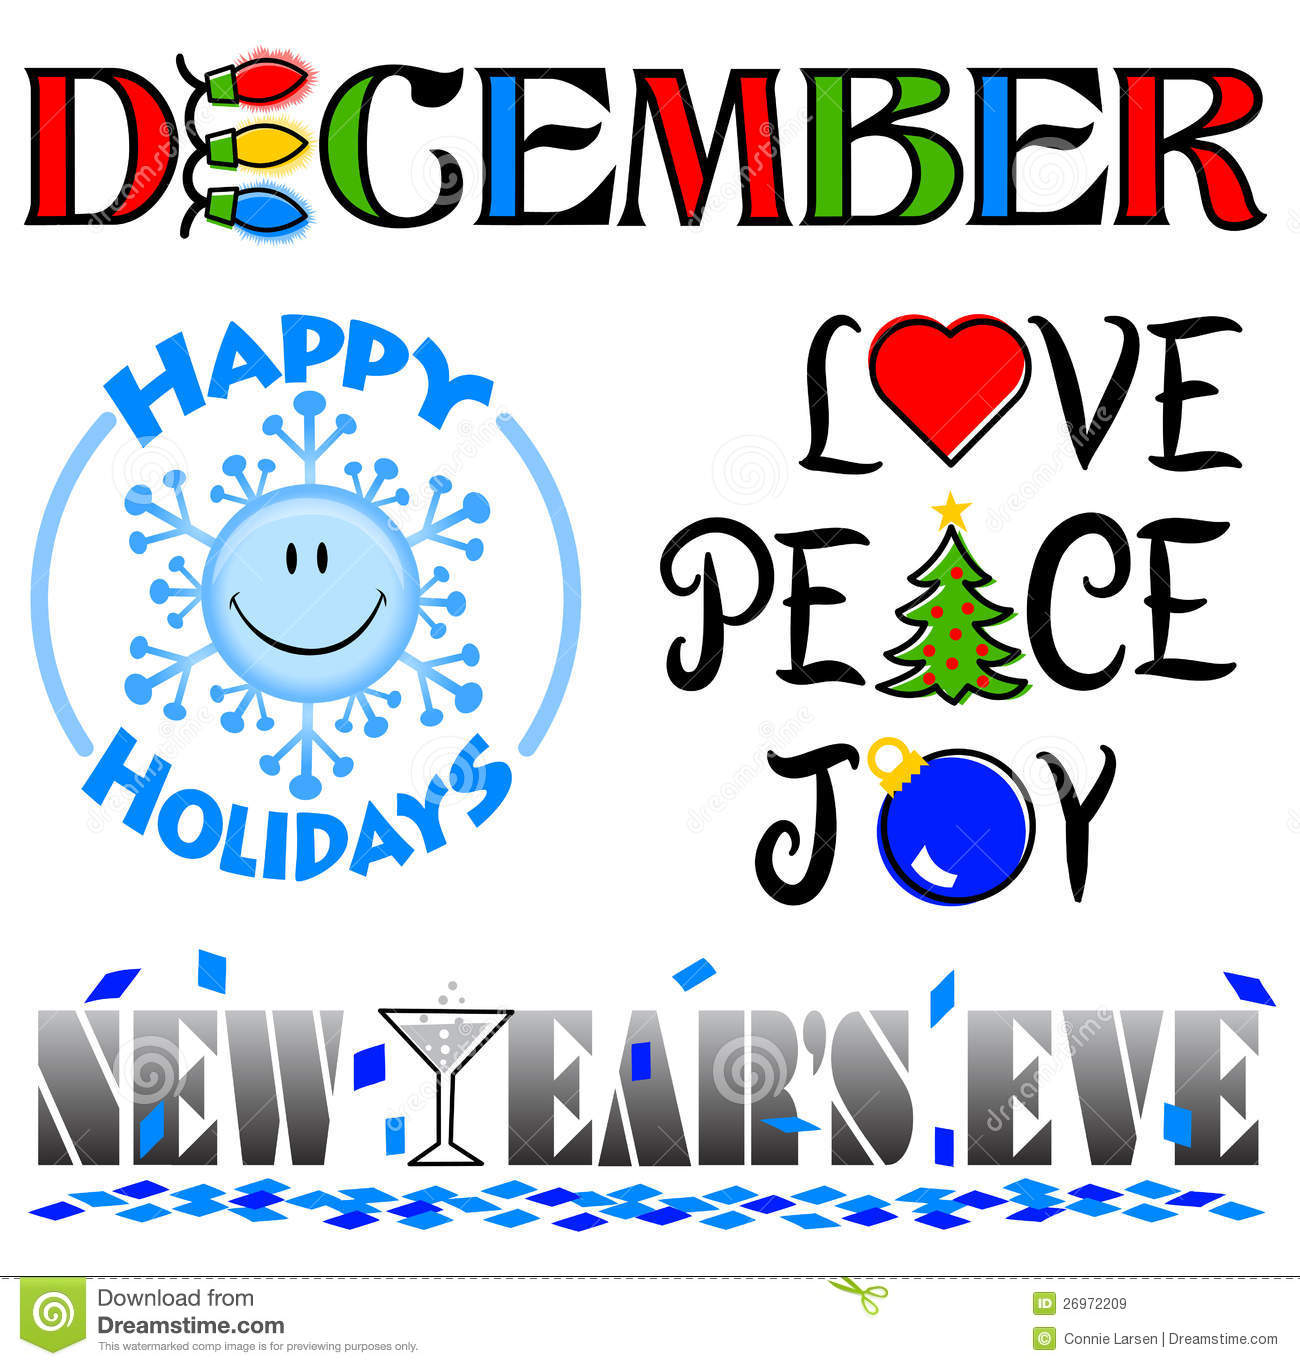 December Events Clip Art Set Eps Royalty Free Stock Images Image